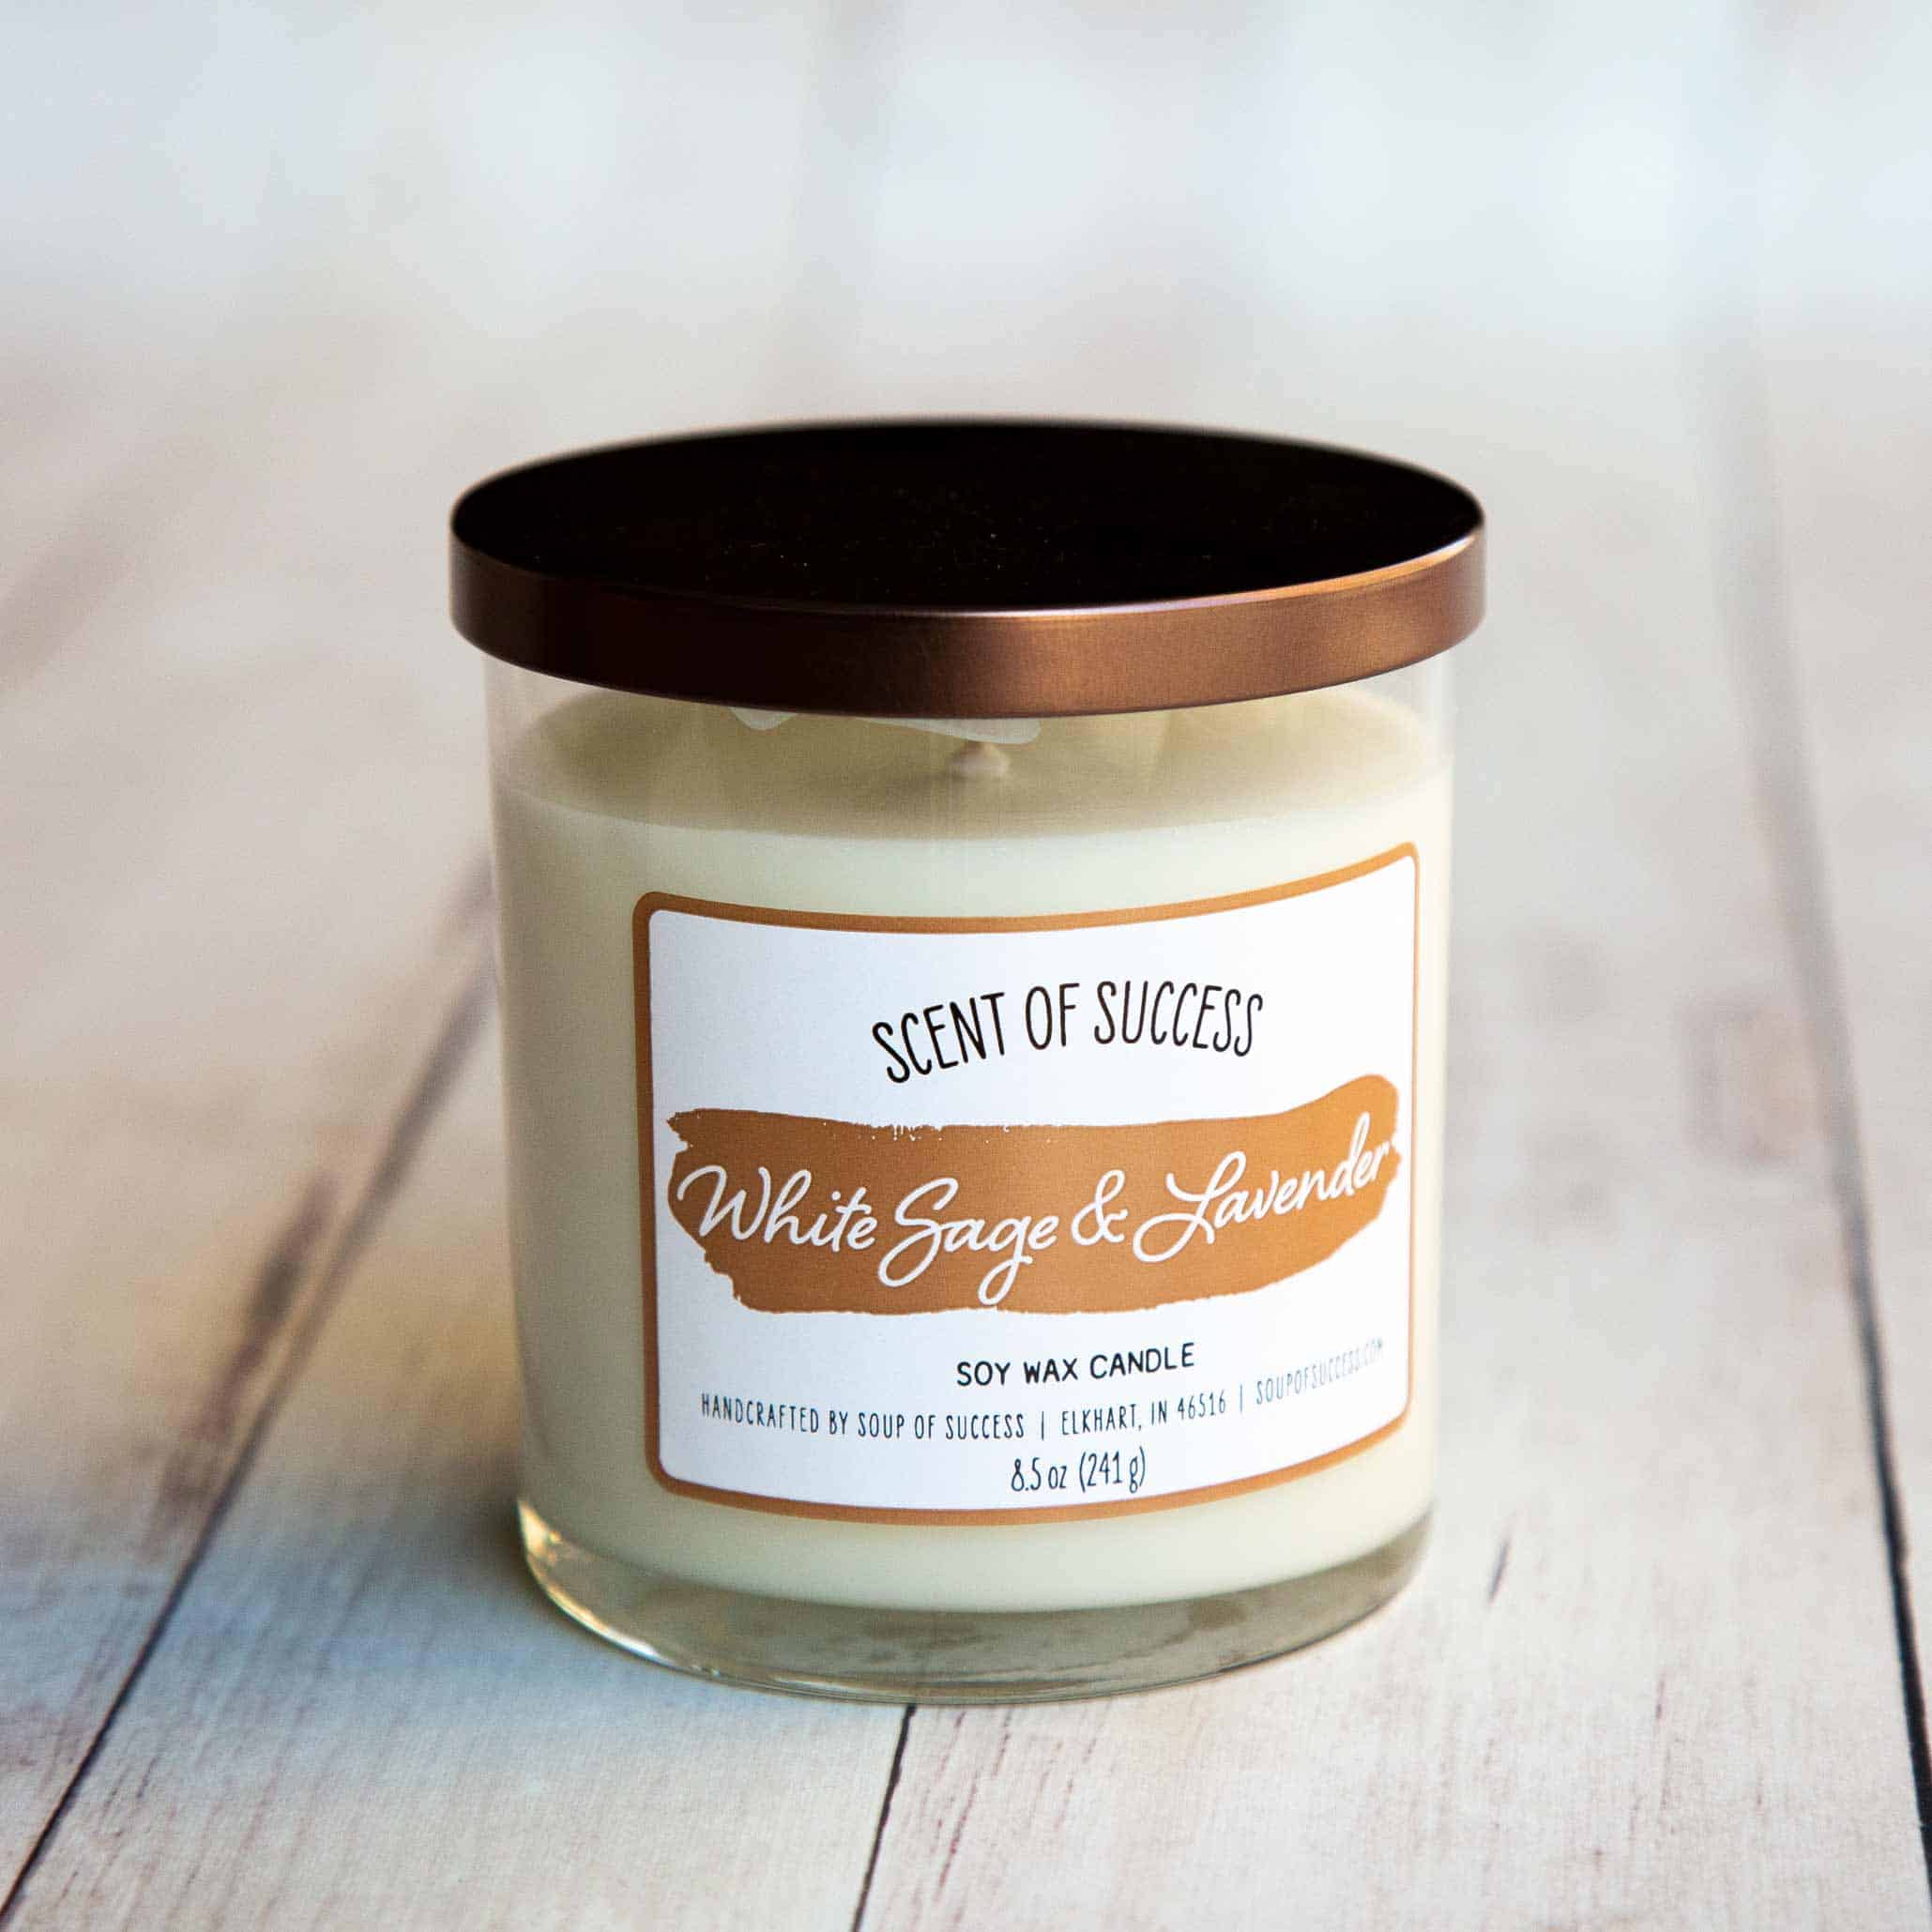 Lavender Soy Wax Blend Scented Candles